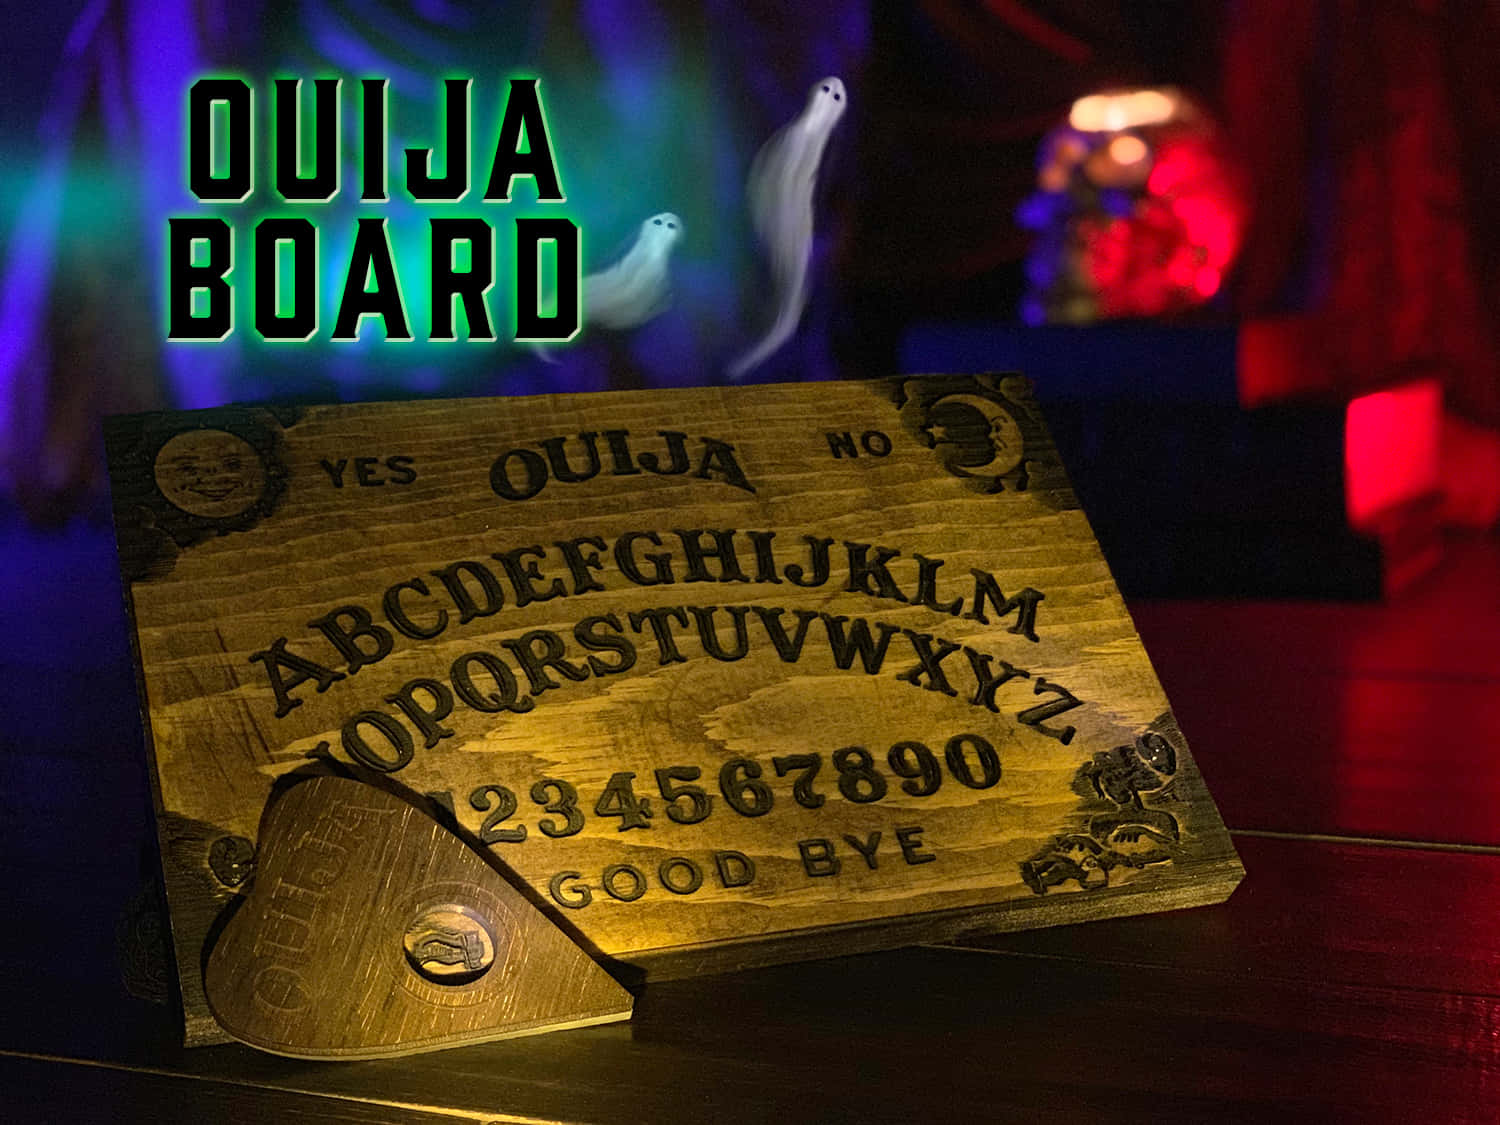 "A spooky ouija board sets the stage for mystery and suspense."